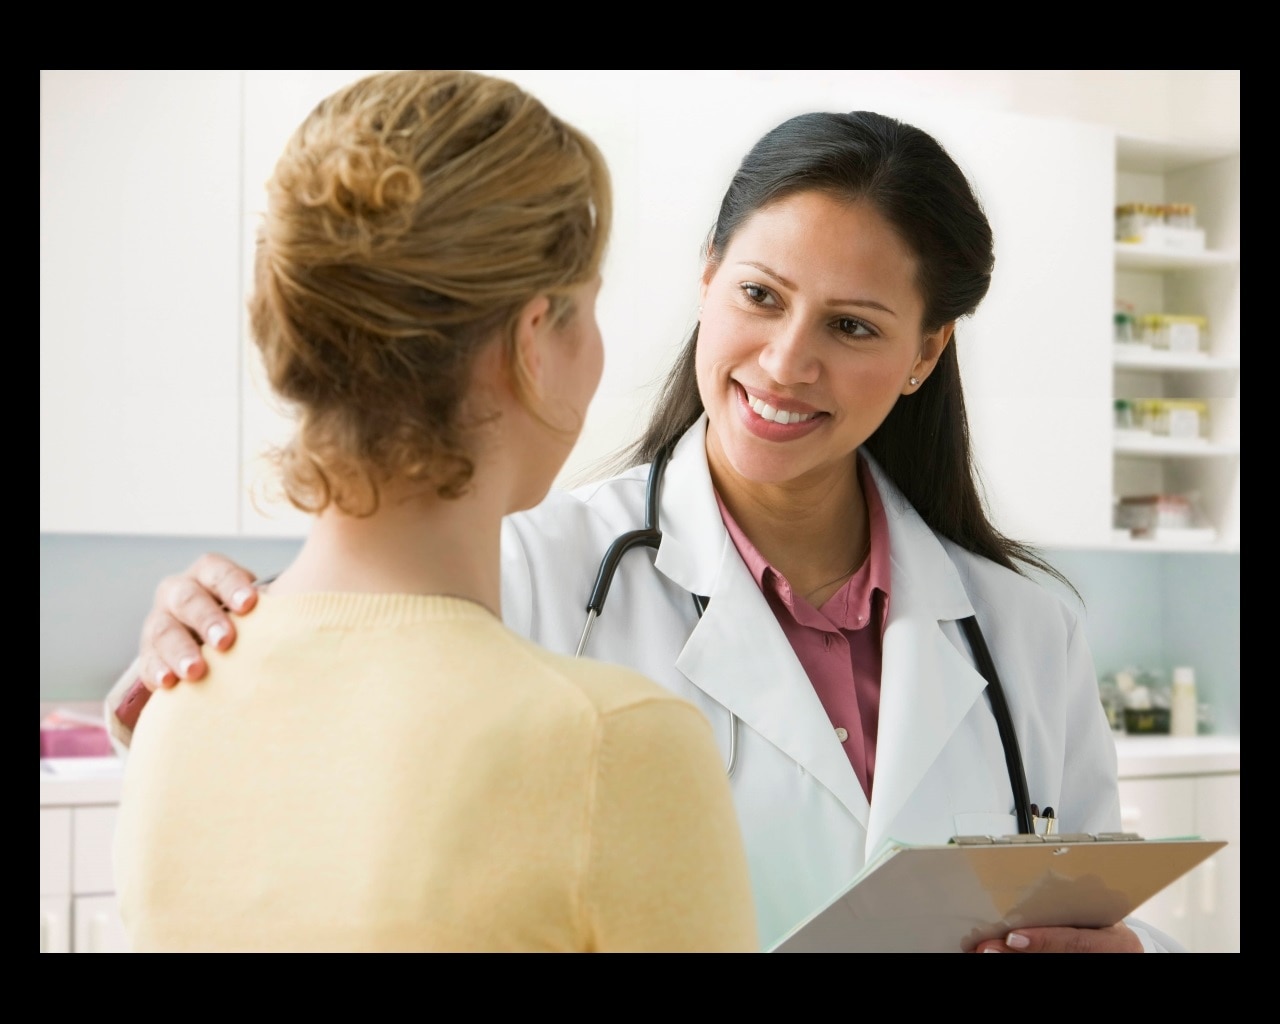 Health care professional talking with a female patient in an exam room.